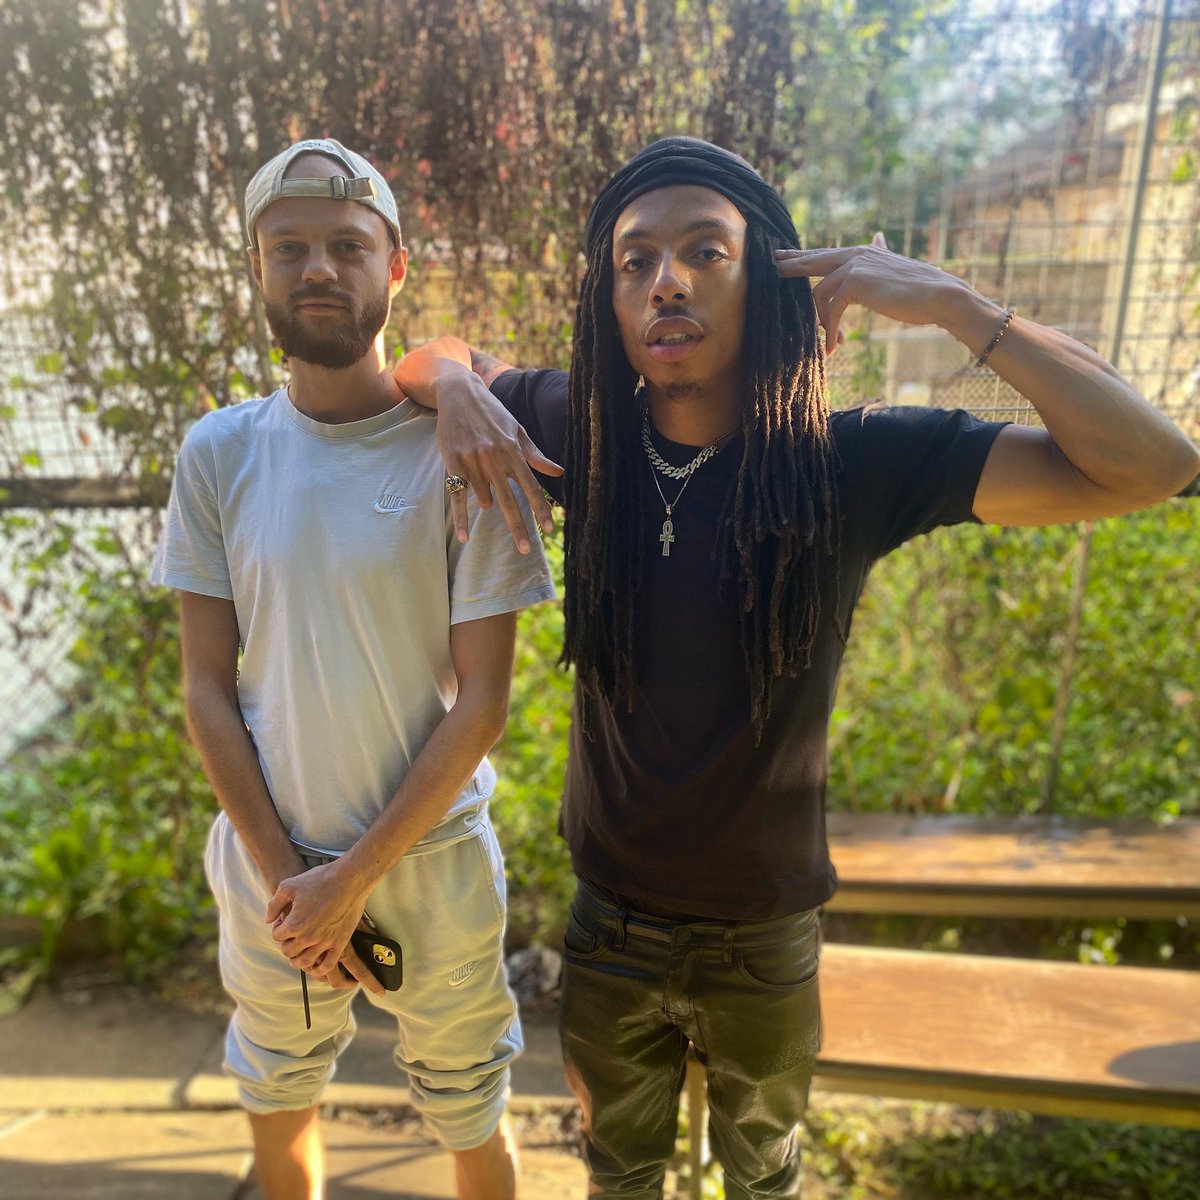 S/O my boy @SquiidApe came all the way from France 🇫🇷 to the Raq to Interview a real one, First rapper bro ever talked to from the U.S. in 2015 & We been locked in every since 💯💯💯✊🏾😎💪💪🌟🌟🔥🔥 #LegendaryMoments 🎬